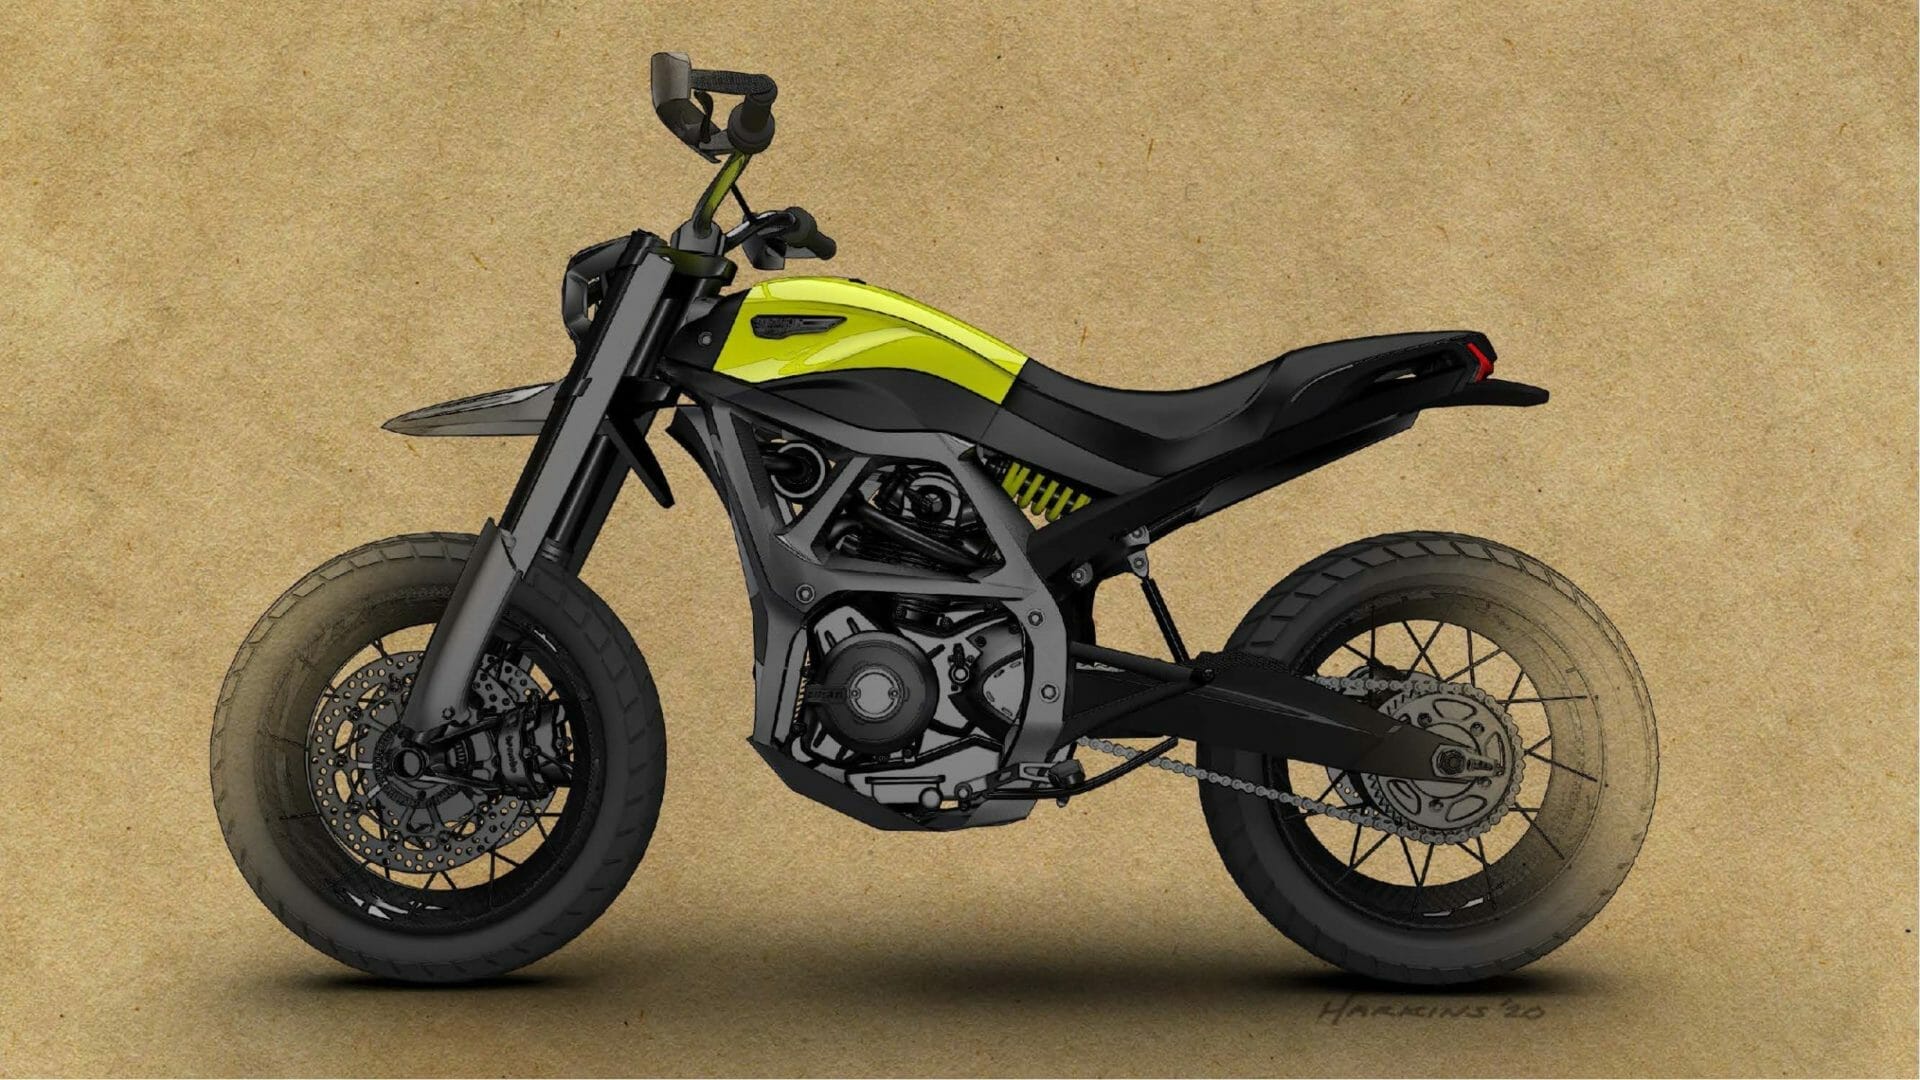 Is this what the Ducati Scrambler future looks like?